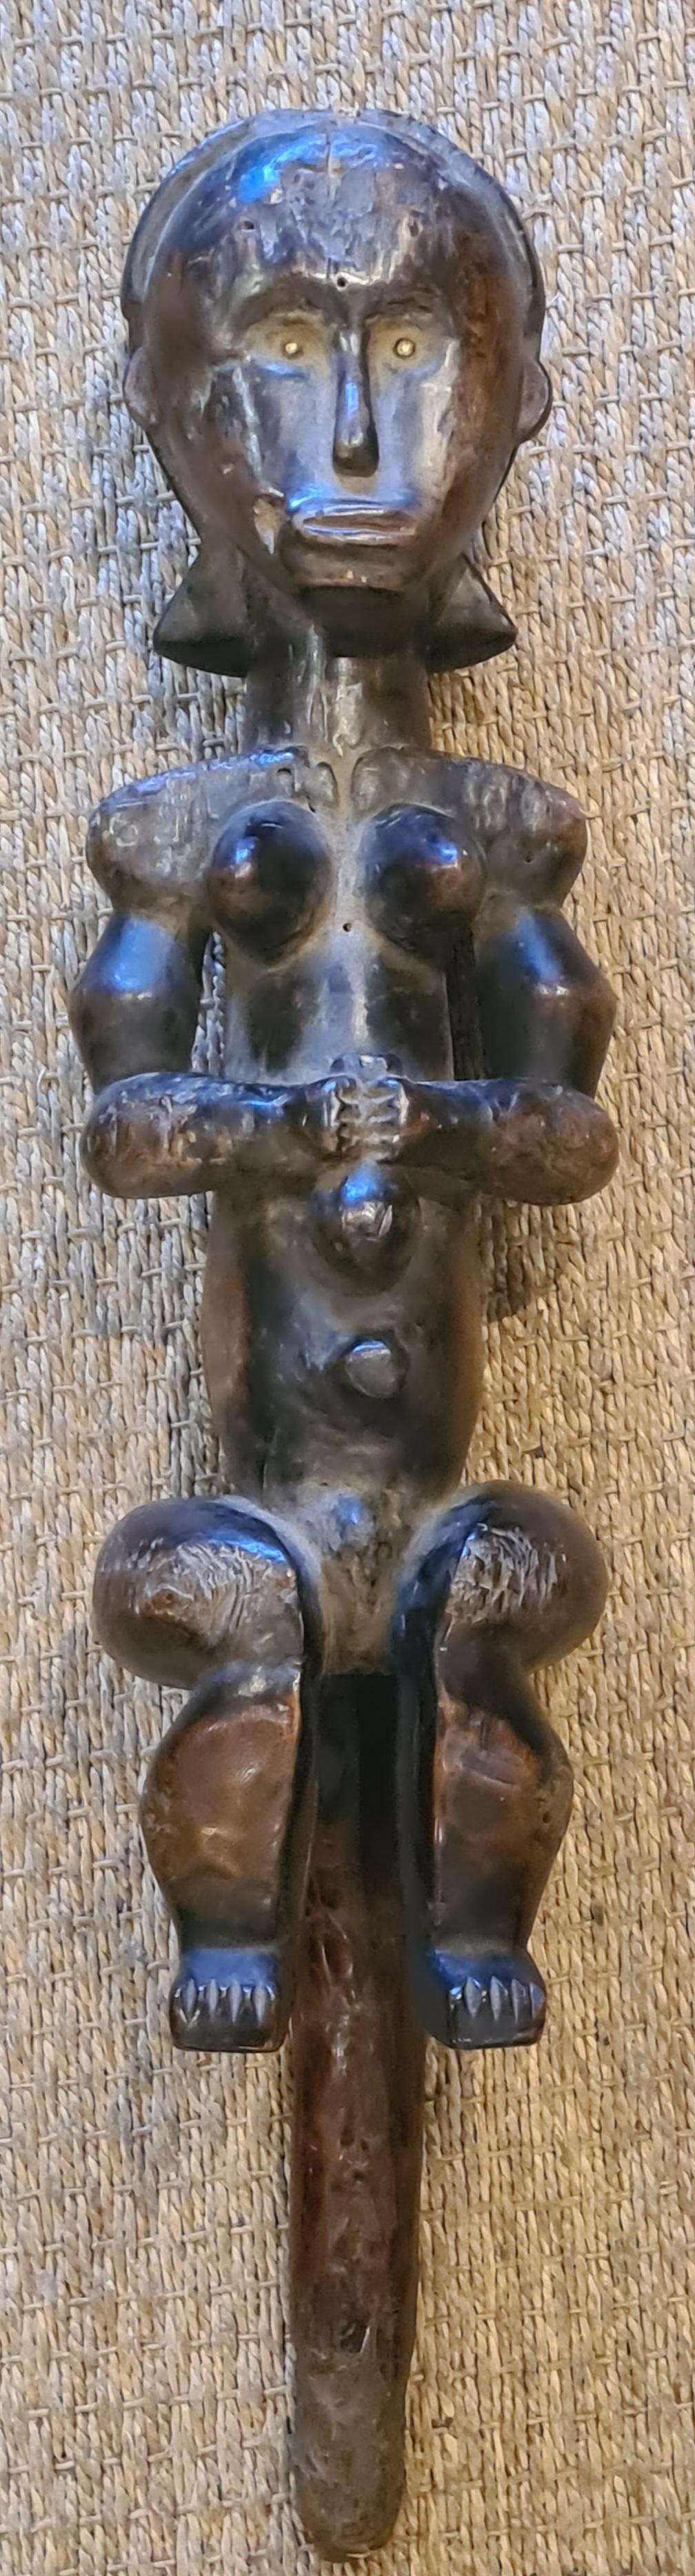 A Fine Fang Female reliquary figure, Eyema Byeri, seated with the hands held together on the abdomen, the muscular arms carved free of the body and holding a vessel to the abdomen, accentuated breasts, the short legs with thighs curving around to